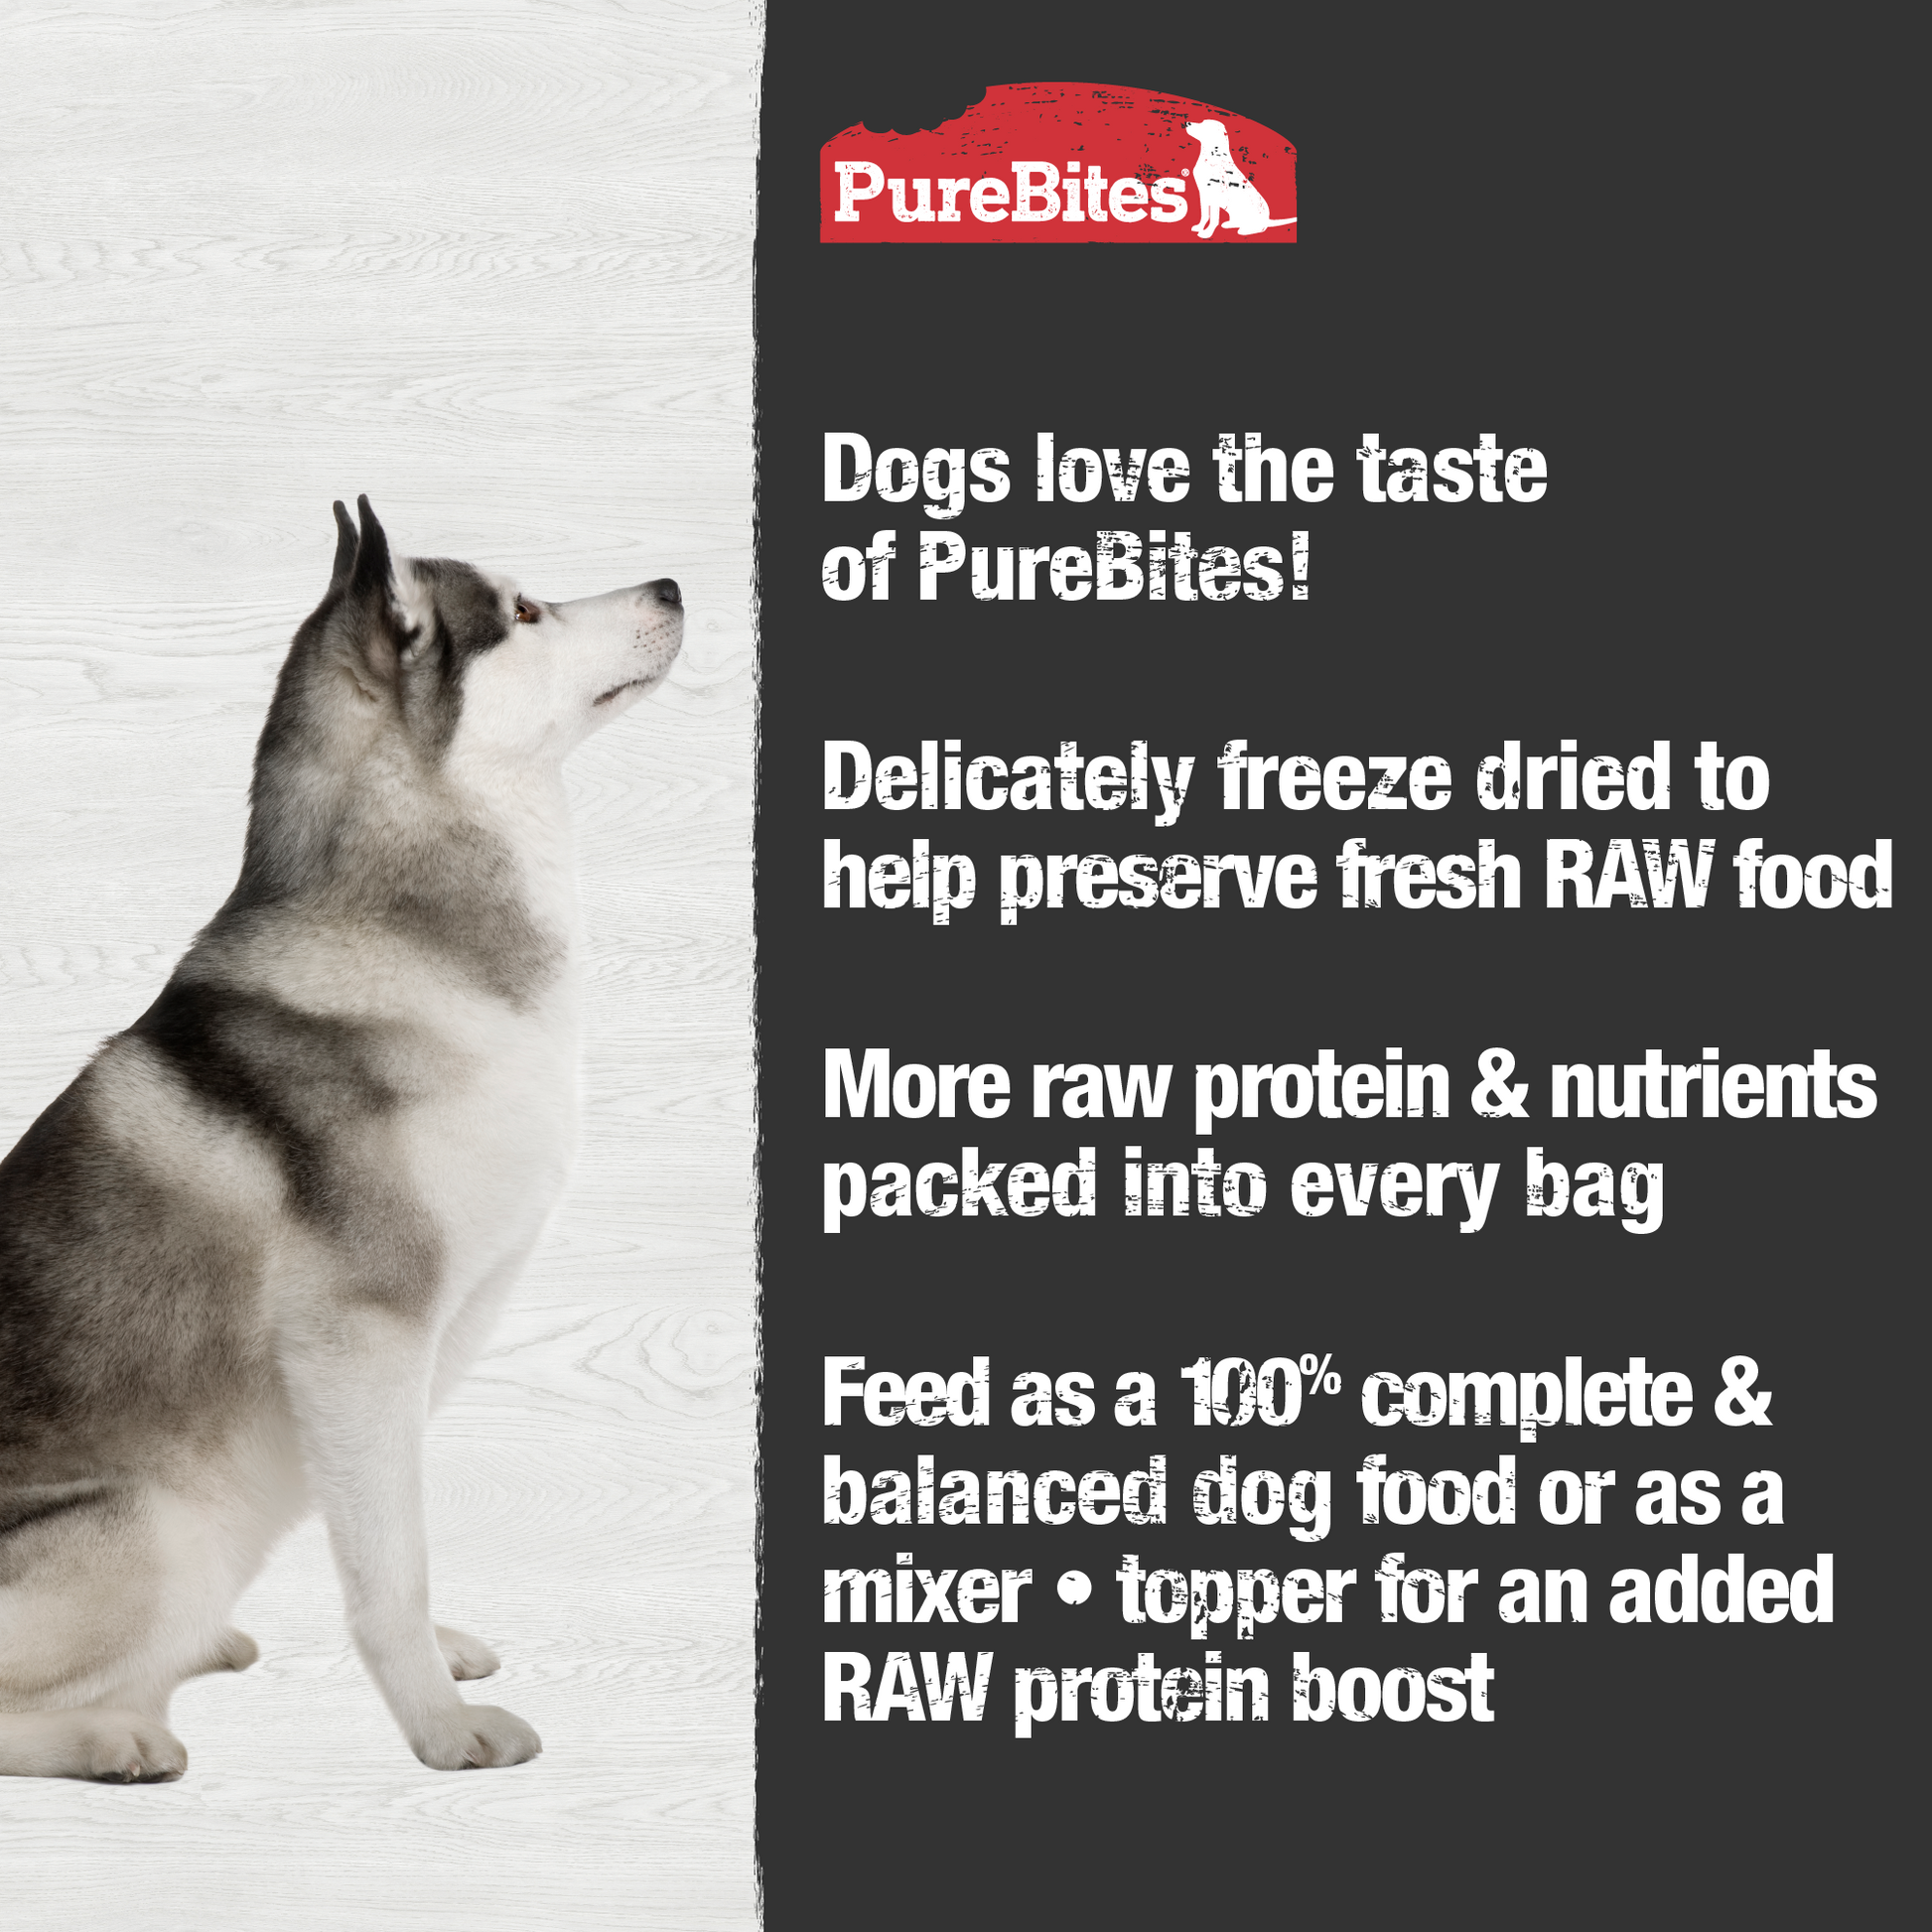 Made fresh & pure means more RAW protein and nutrients packed into every bag. Our chicken recipe food or topper is freeze dried to help preserve the ingredient's RAW taste, and nutrition, and mirror a dog’s ancestral diet